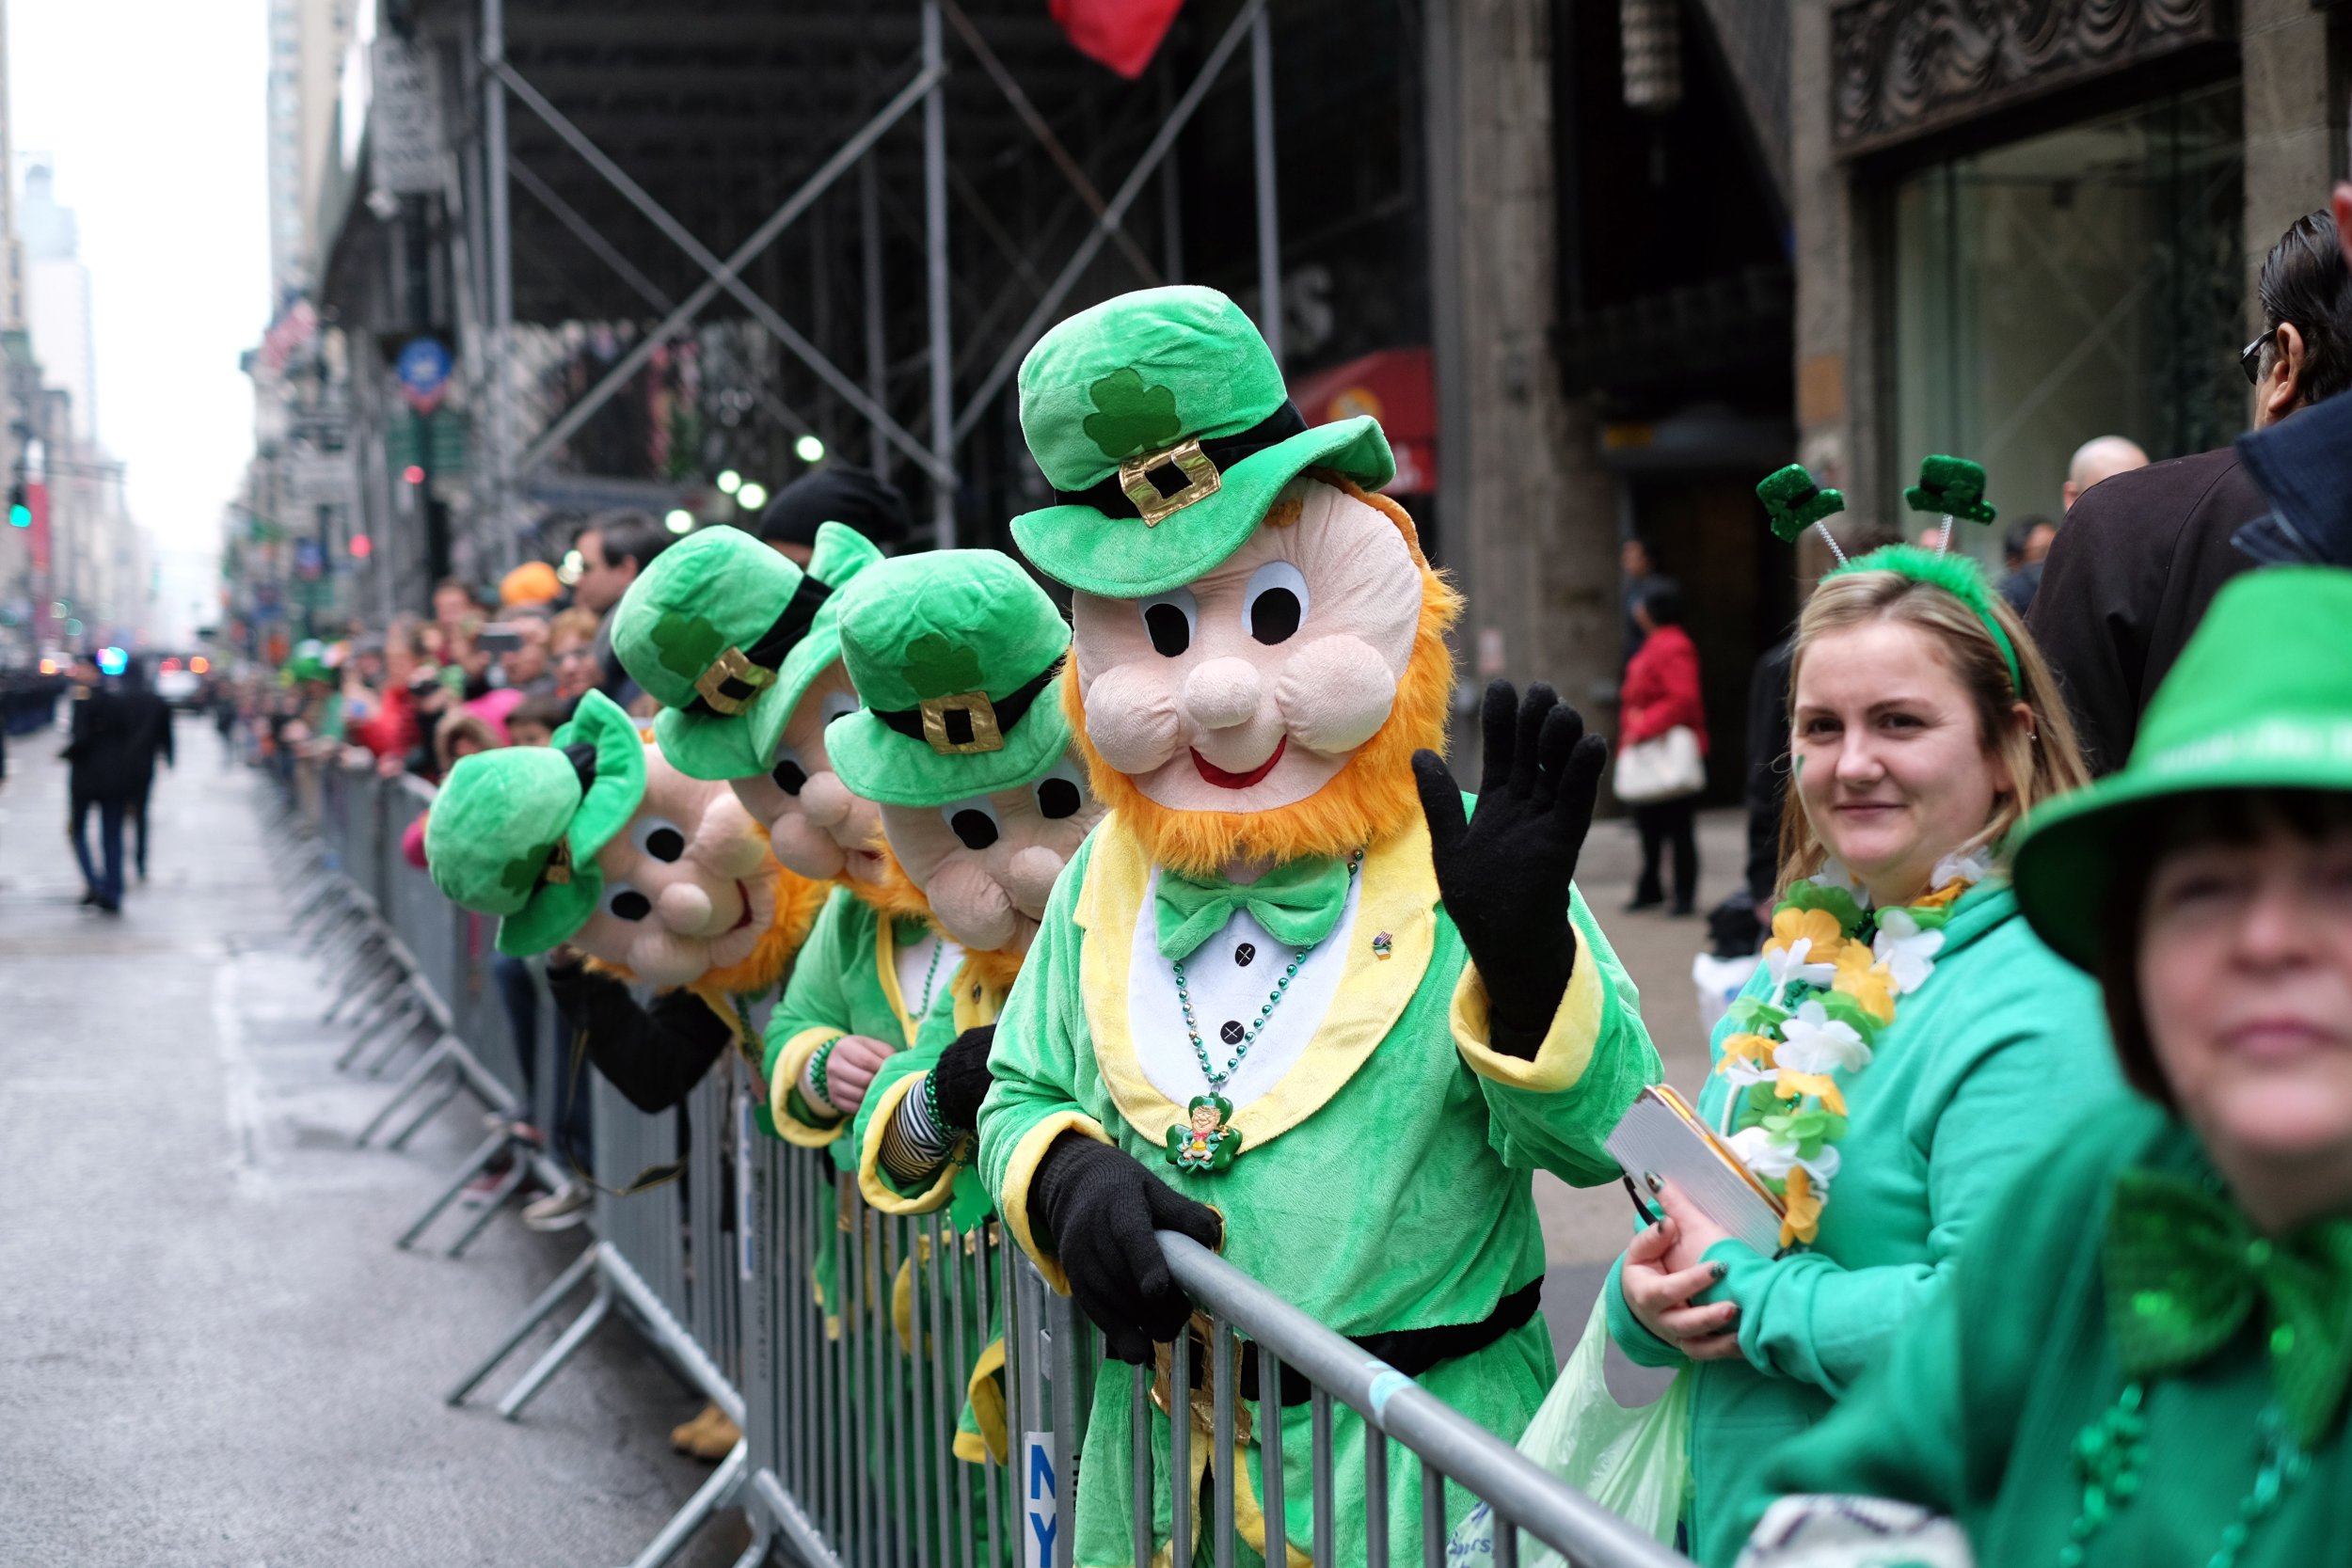 St. Patrick's Day 2018 Facts, History And Traditions For The Irish